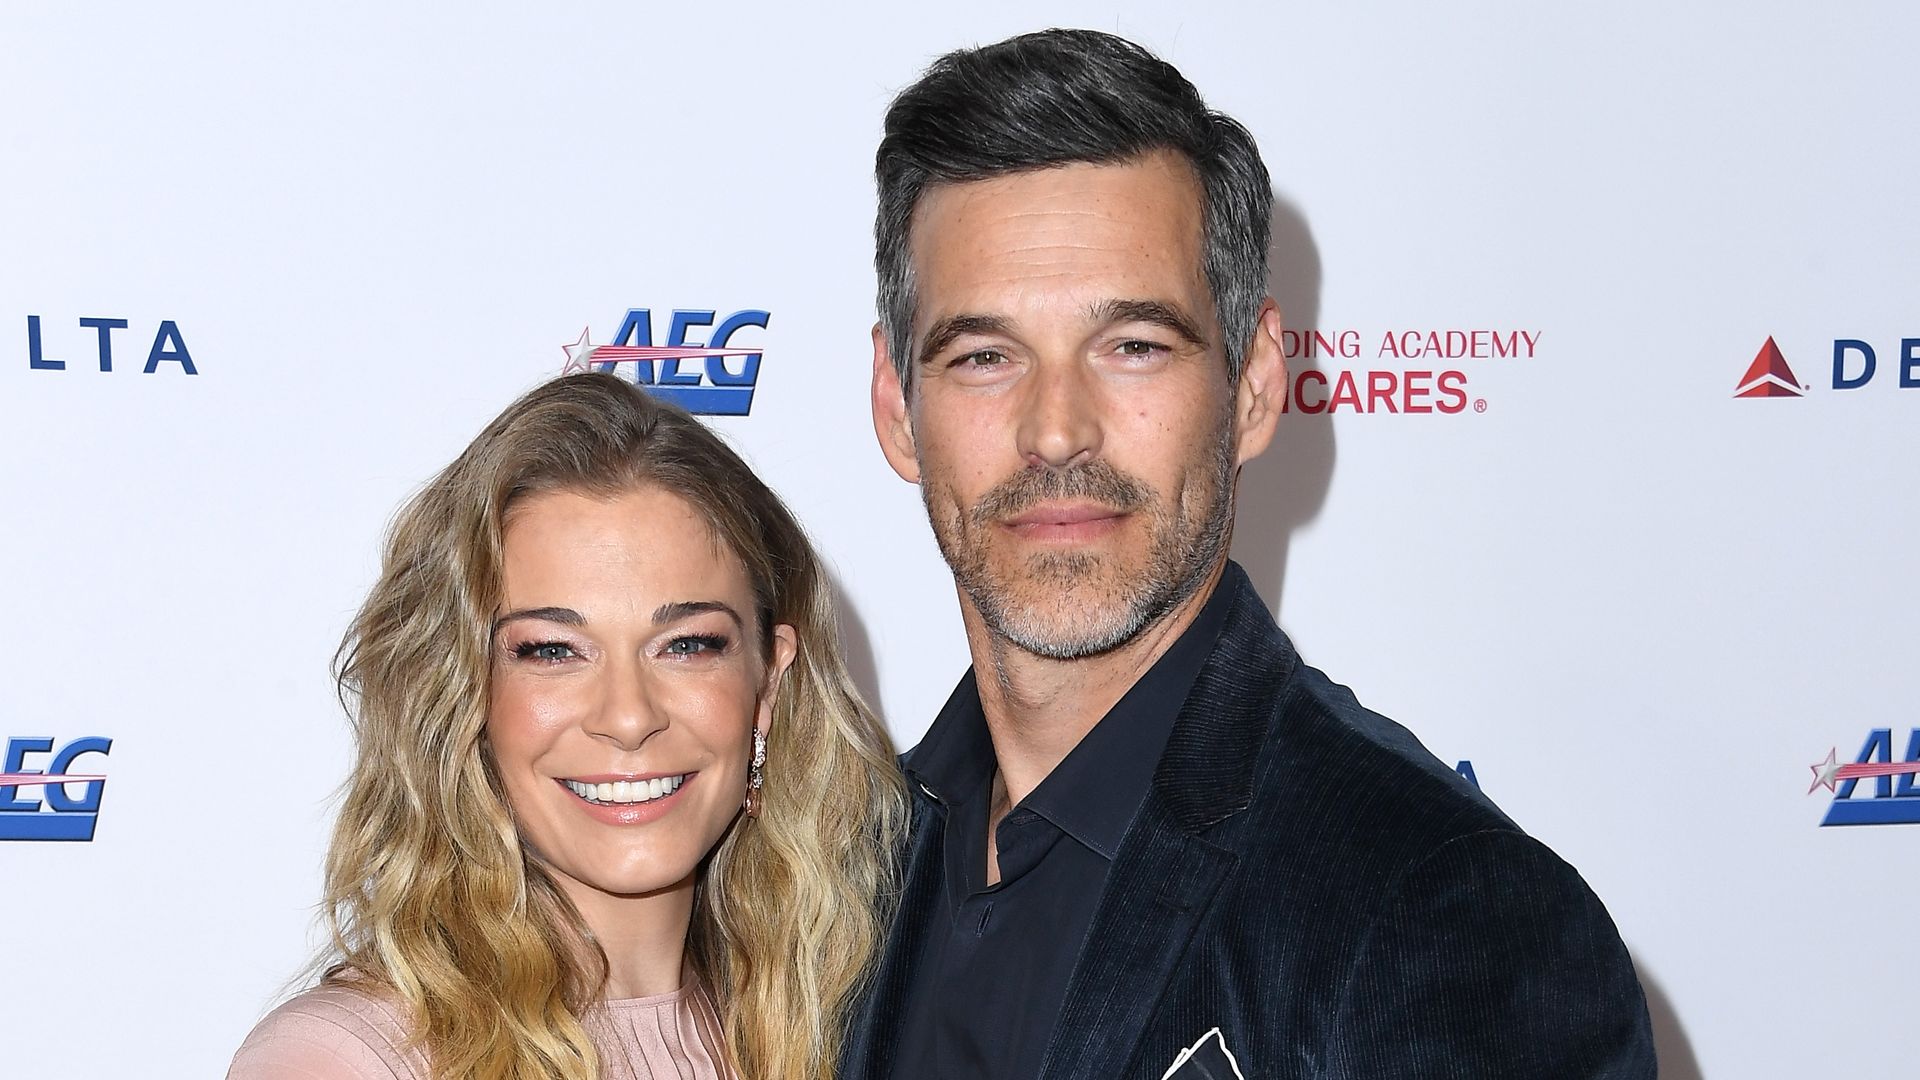 LeAnn Rimes and Eddie Cibrian attend MusiCares Person of the Year honoring Aerosmith at West Hall at Los Angeles Convention Center on January 24, 2020 in Los Angeles, California